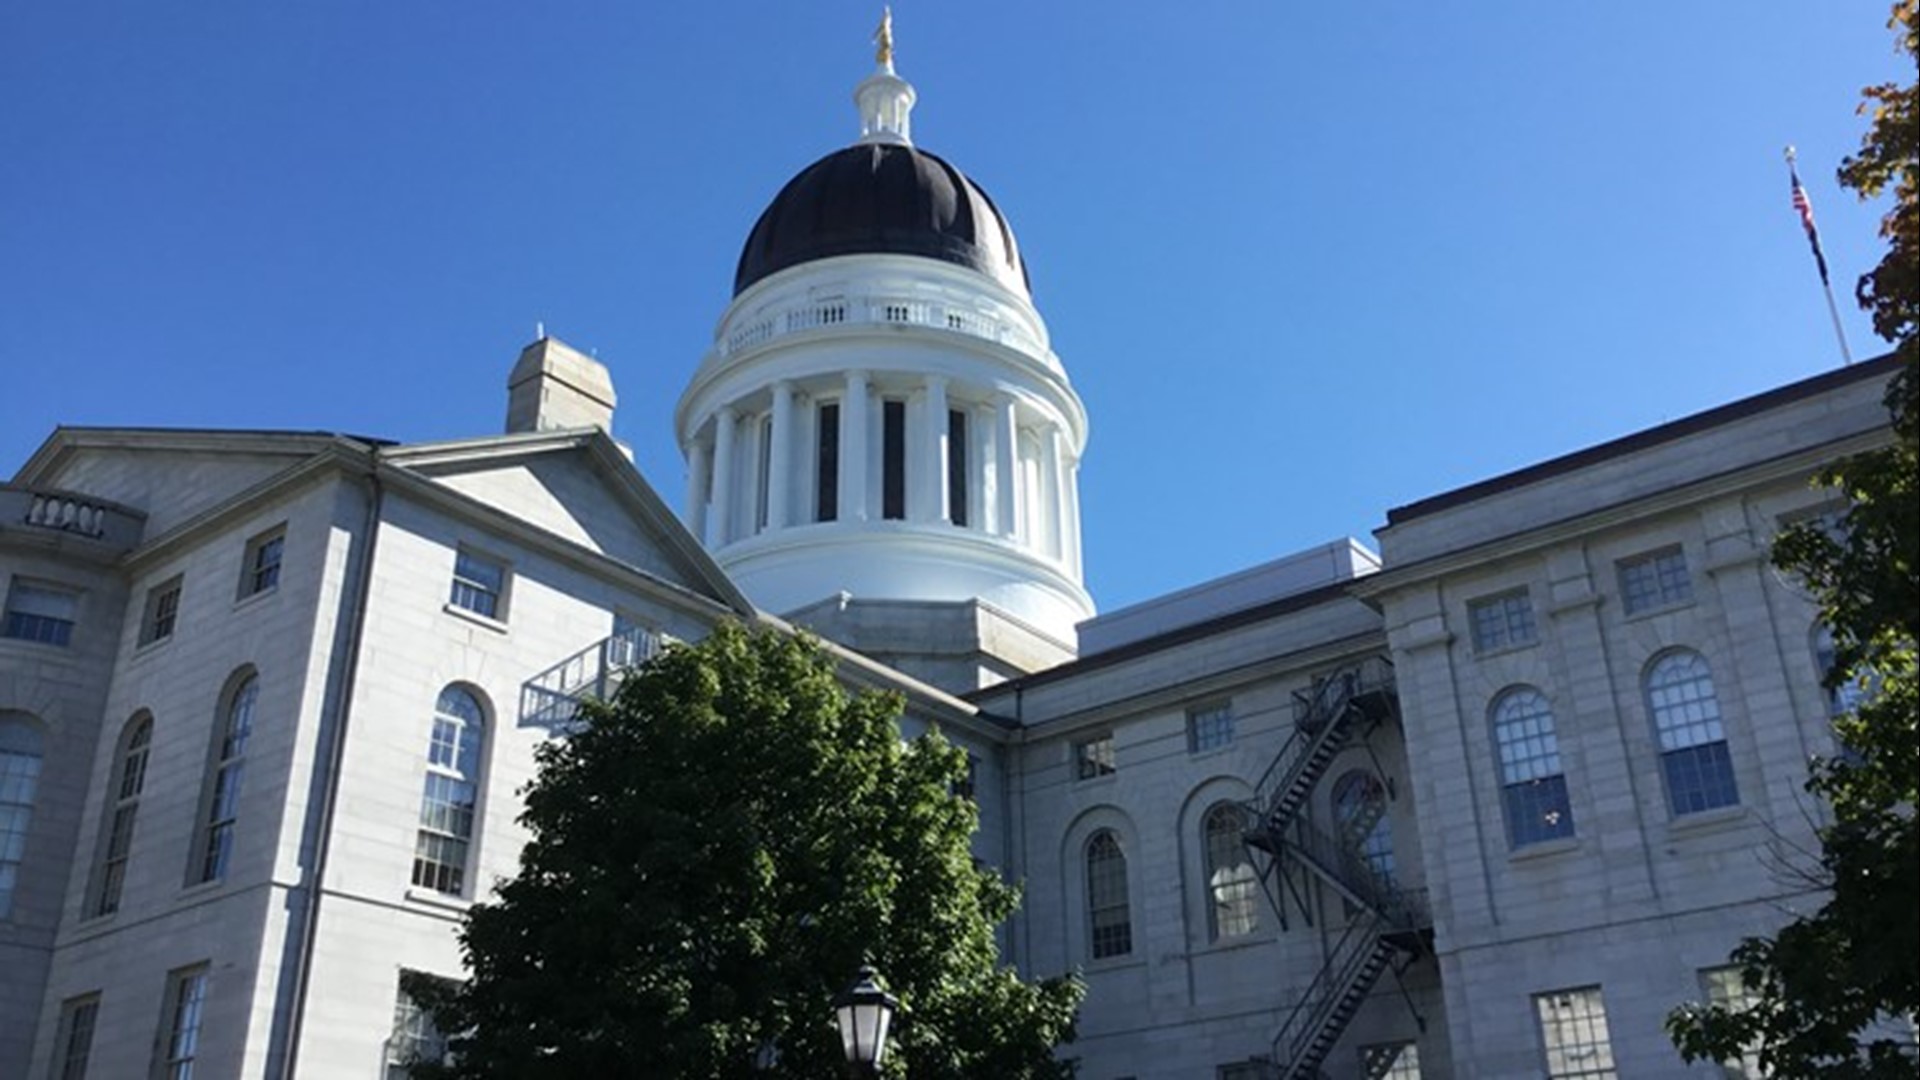 The 2022 legislative session began on Wednesday, January 5 at the State House in Augusta.